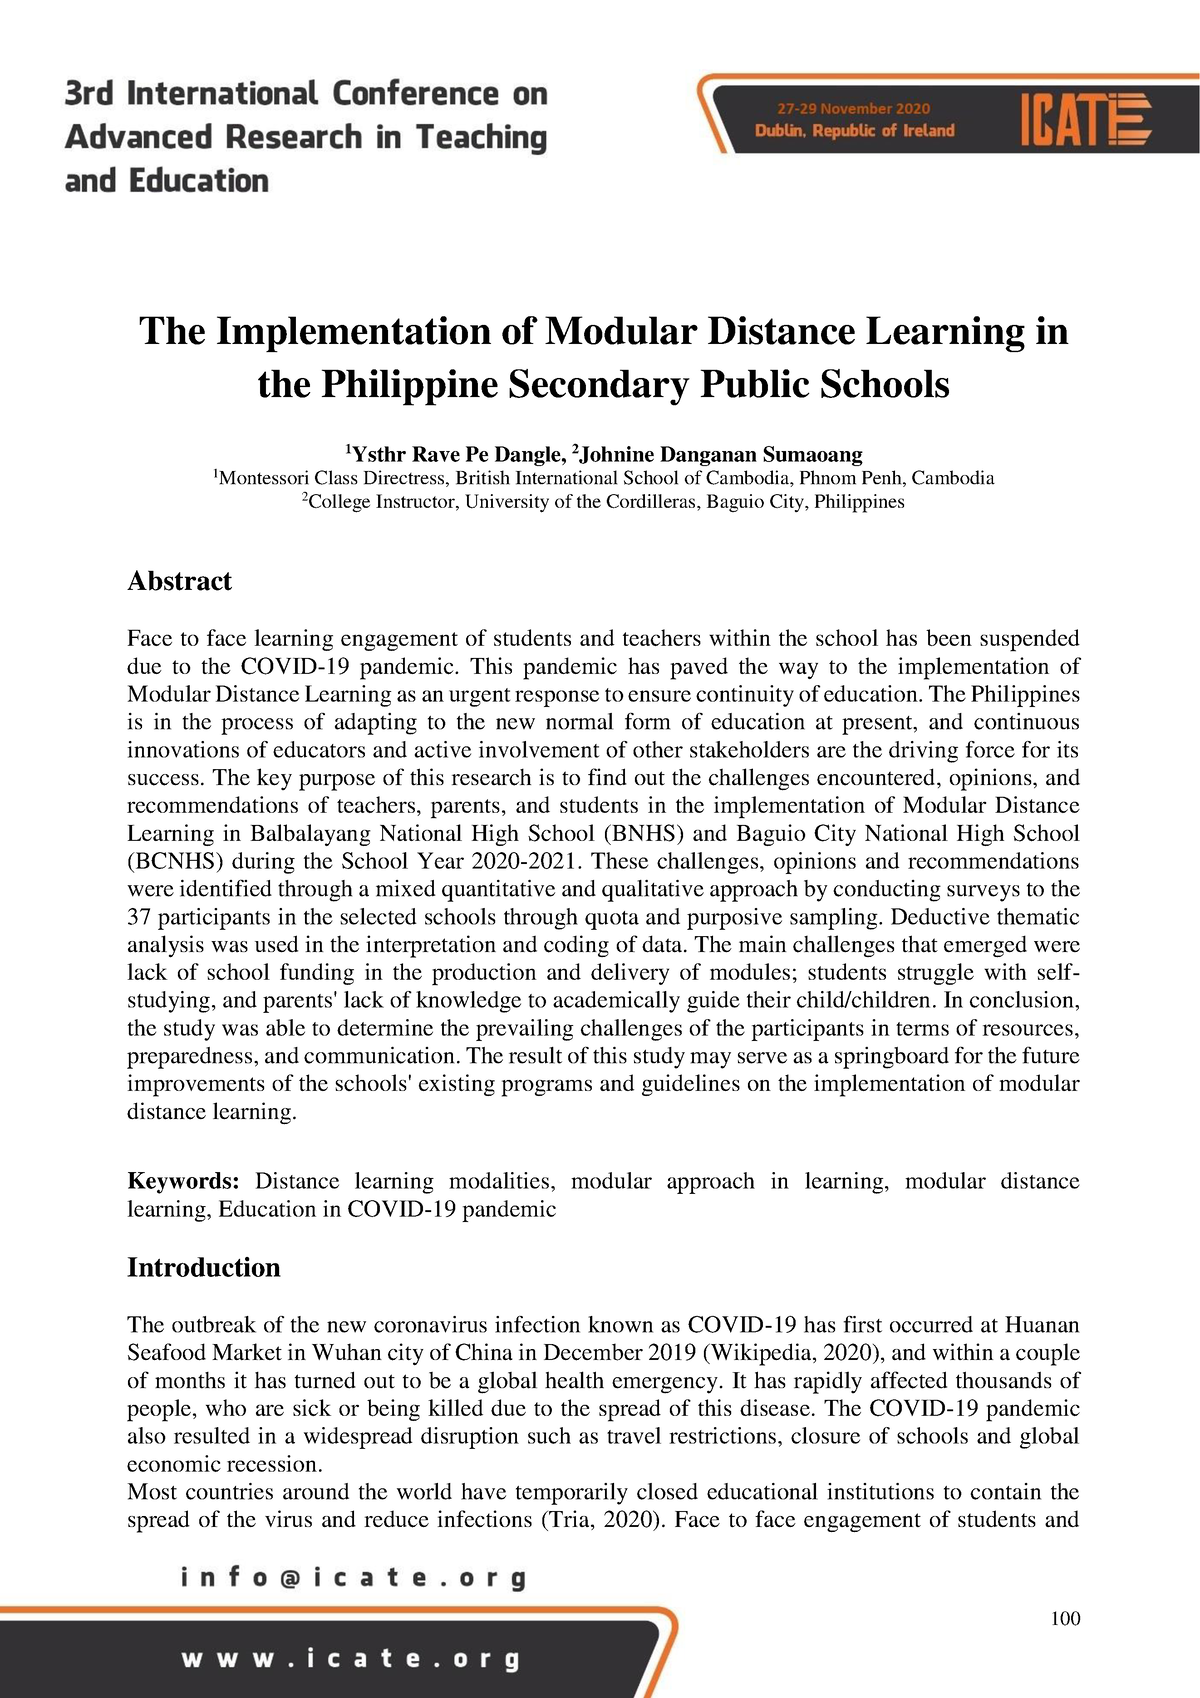 thesis about distance learning in the philippines